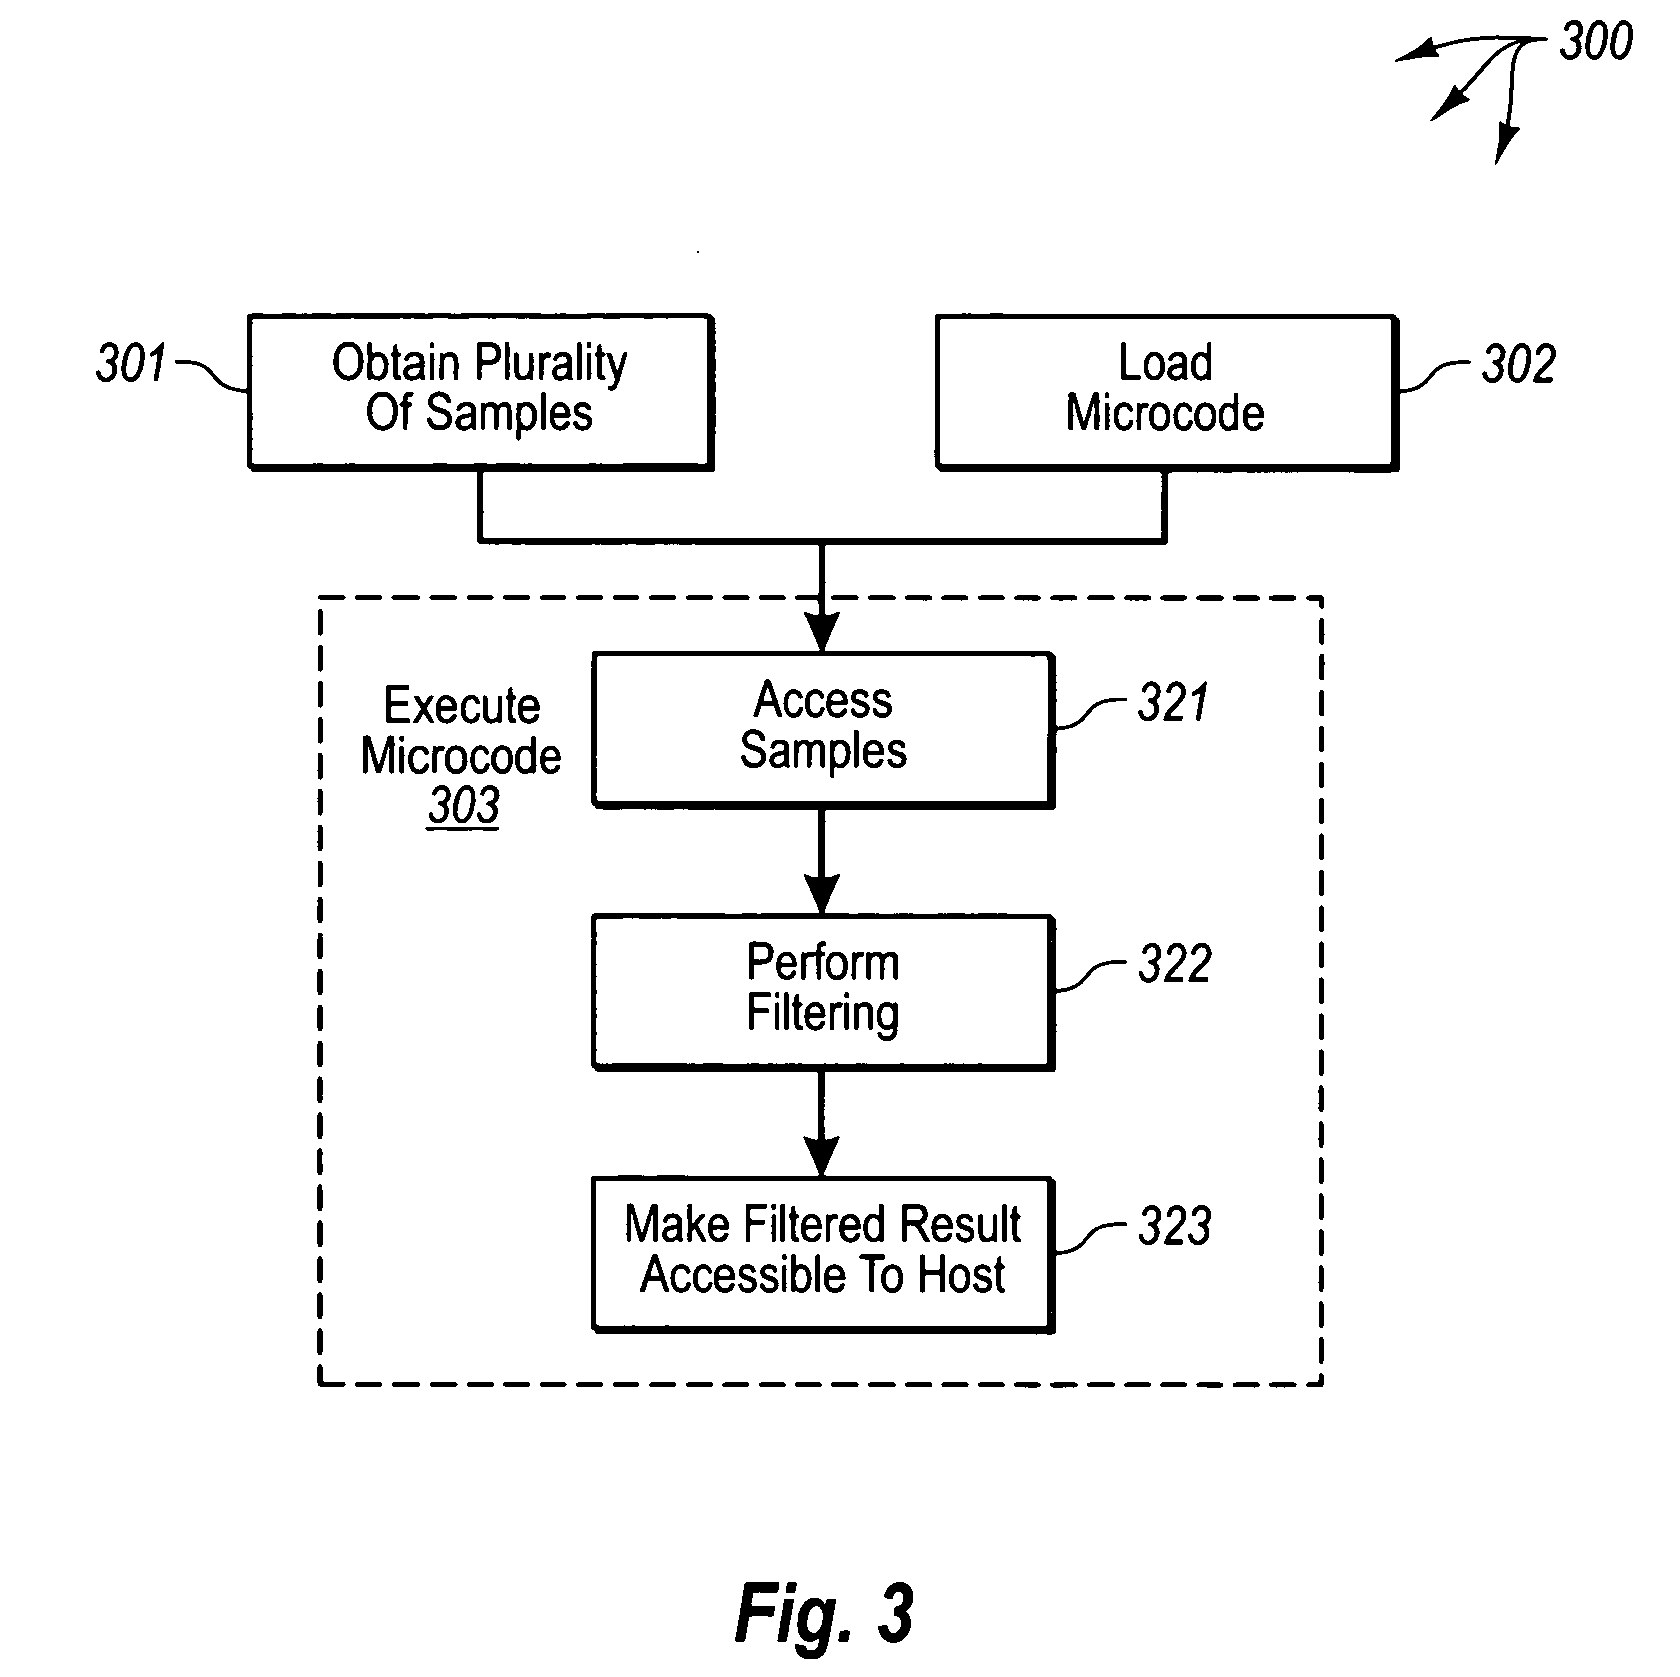 Filtering digital diagnostics information in an optical transceiver prior to reporting to host